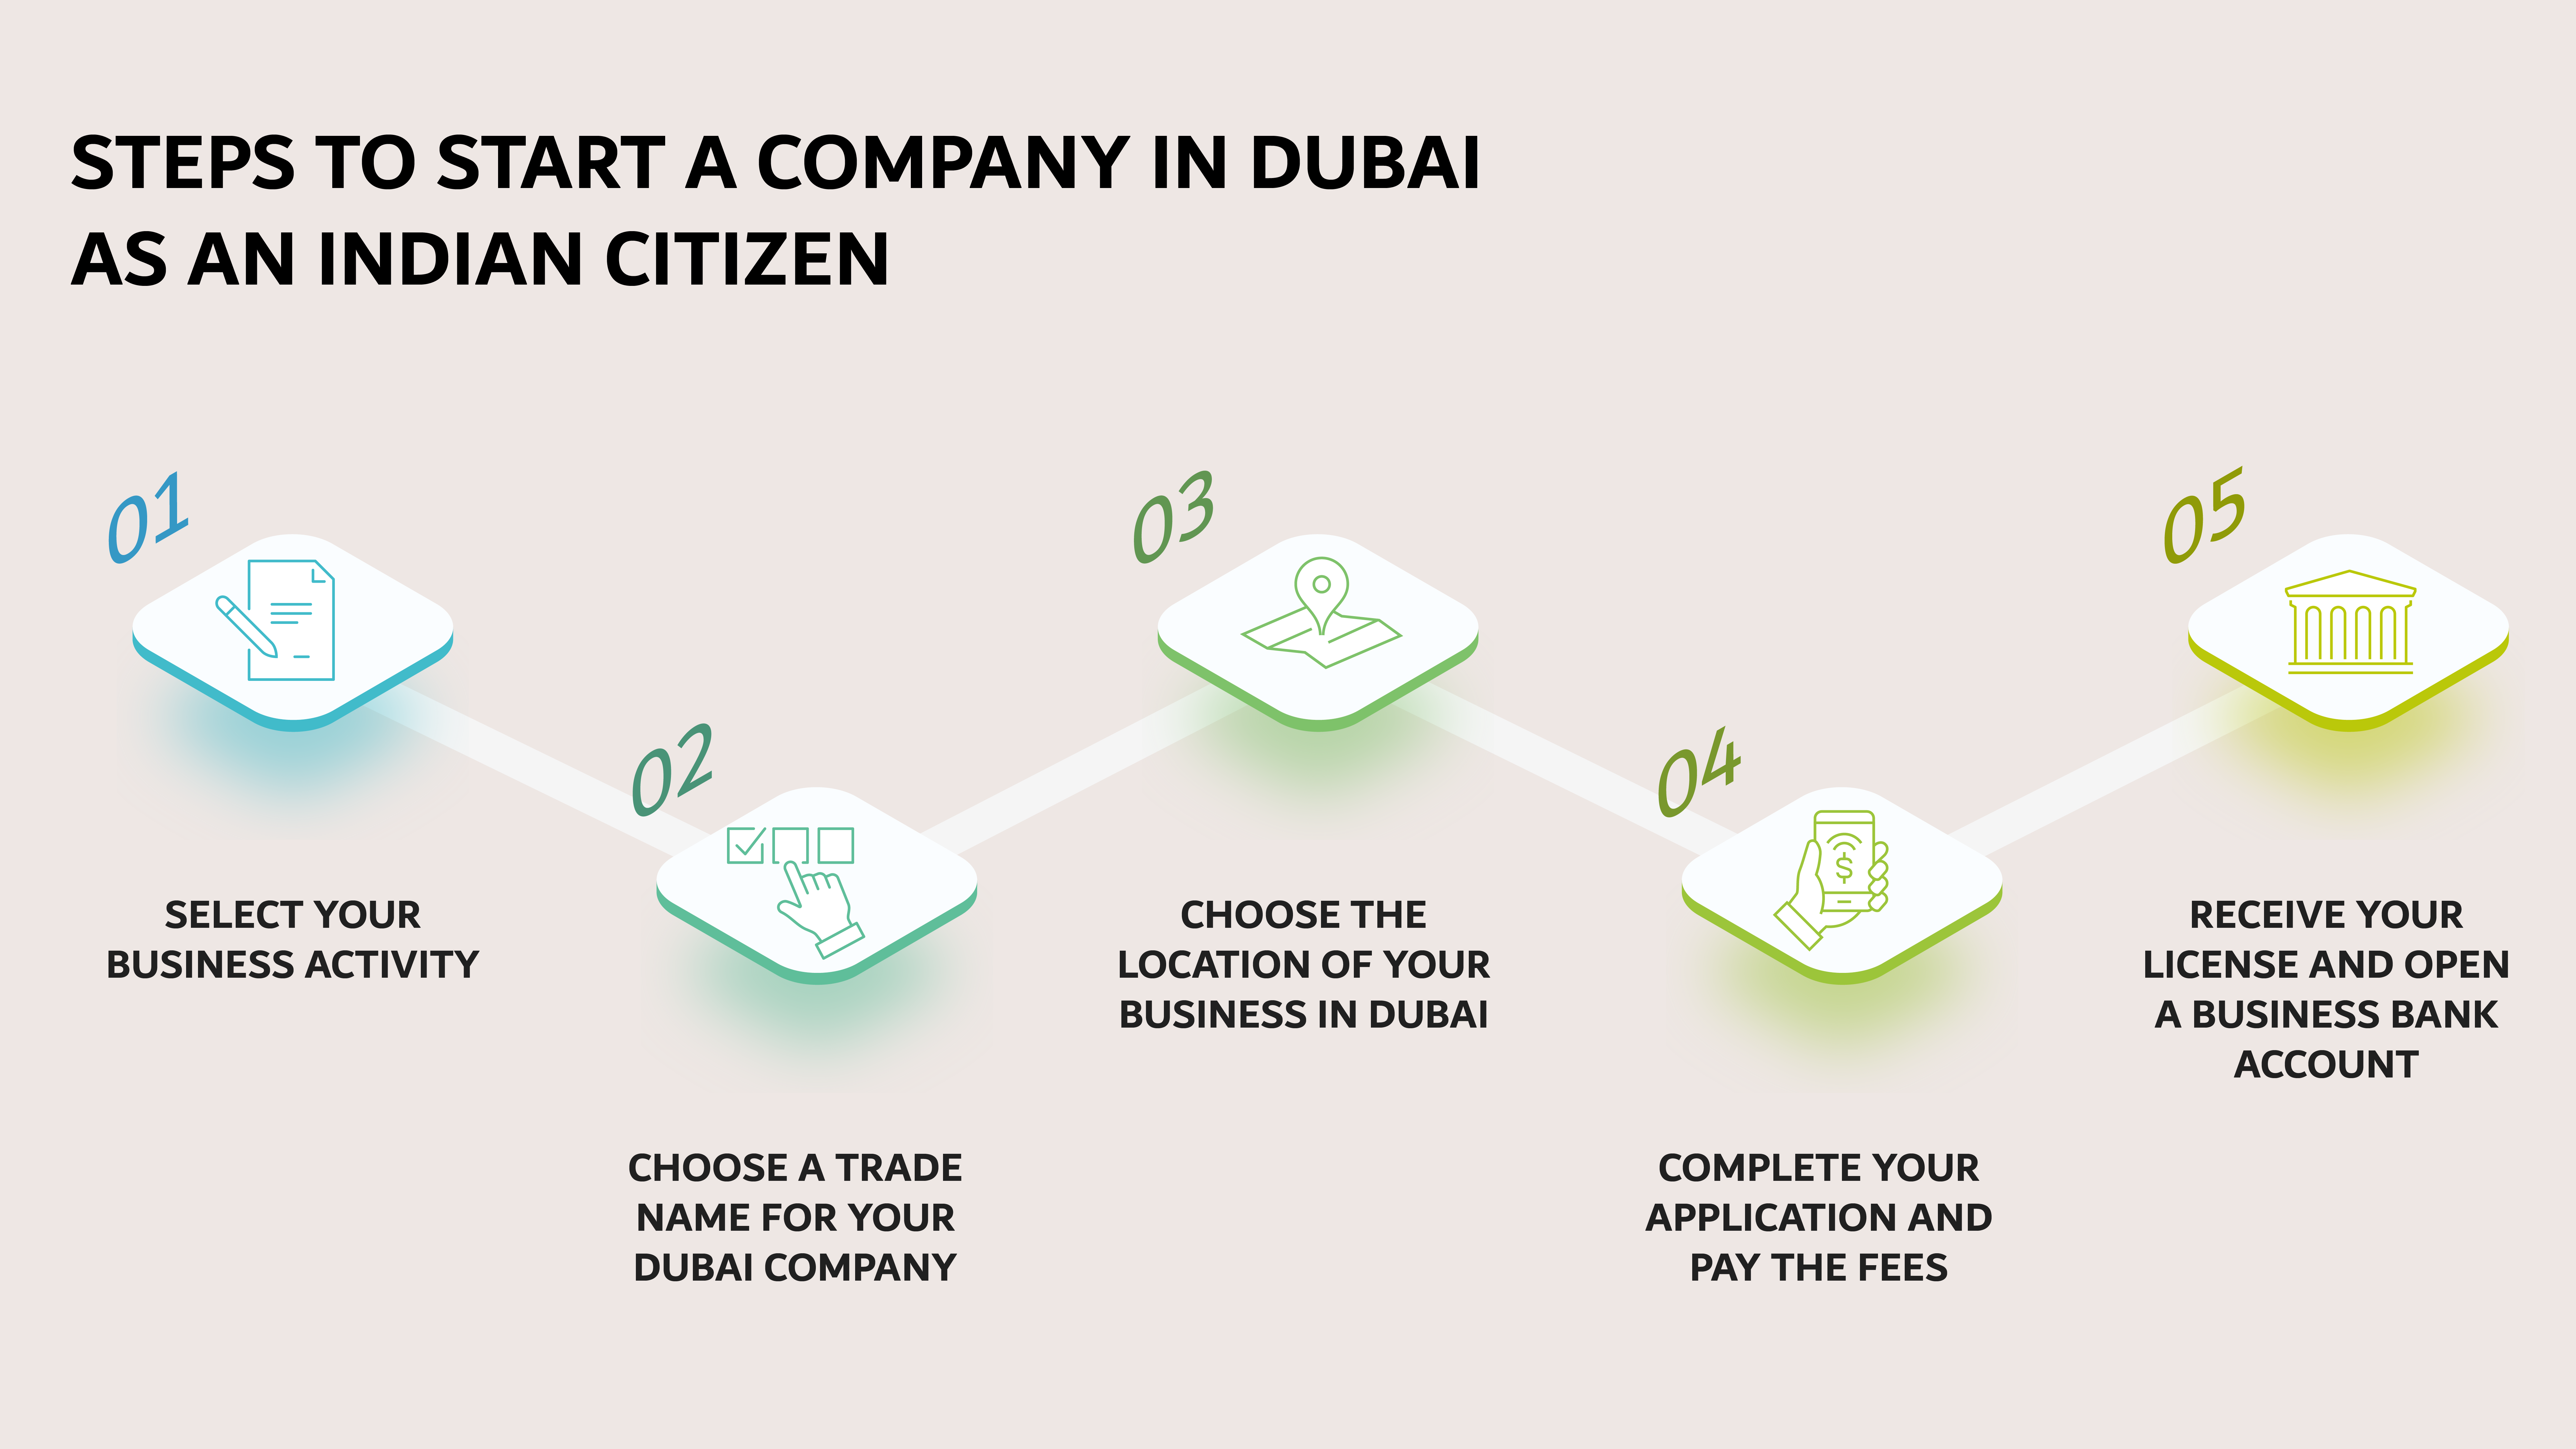 STEPS TO START A COMPANY IN DUBAI AS AN INDIAN CITIZEN